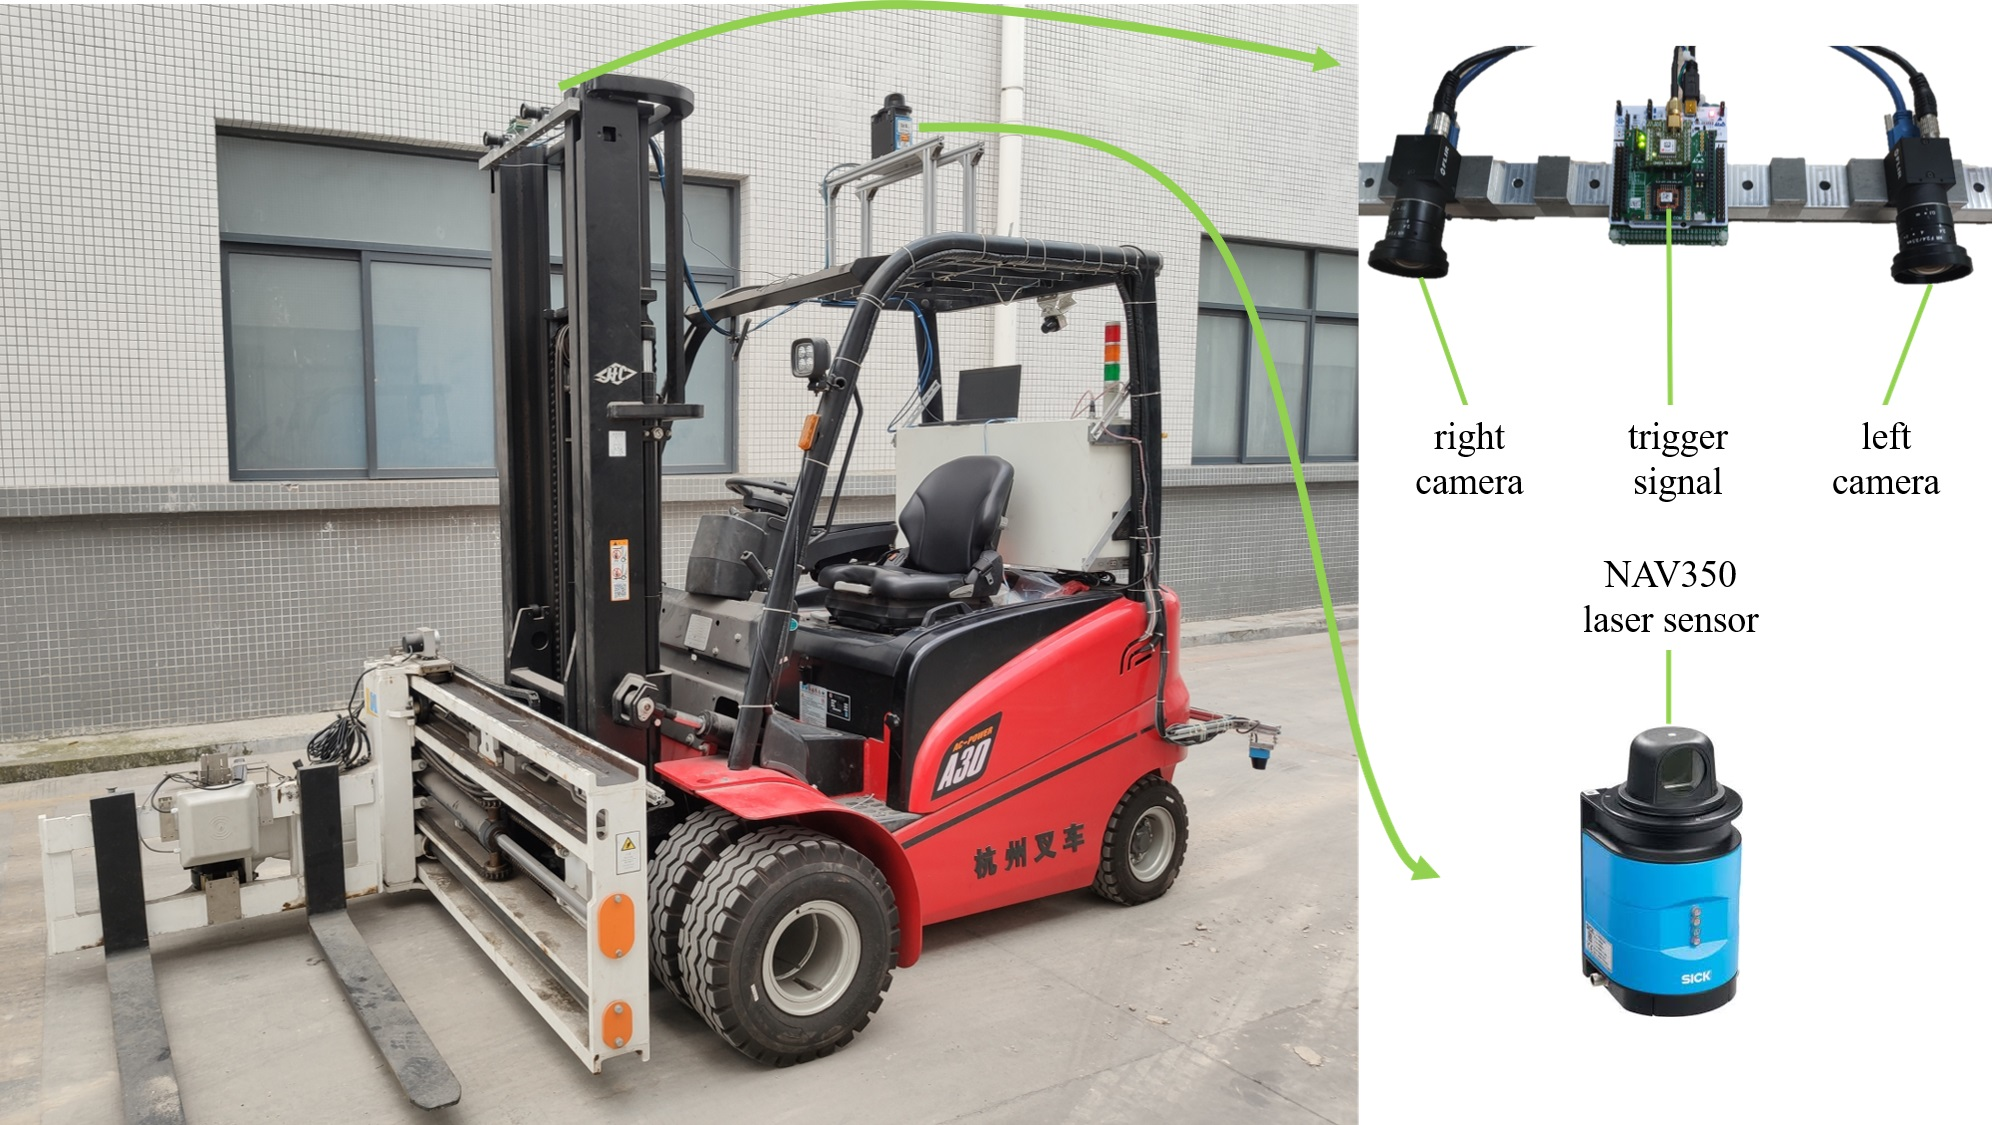 Applied Sciences Free Full Text Efficient Stereo Visual Simultaneous Localization And Mapping For An Autonomous Unmanned Forklift In An Unstructured Warehouse